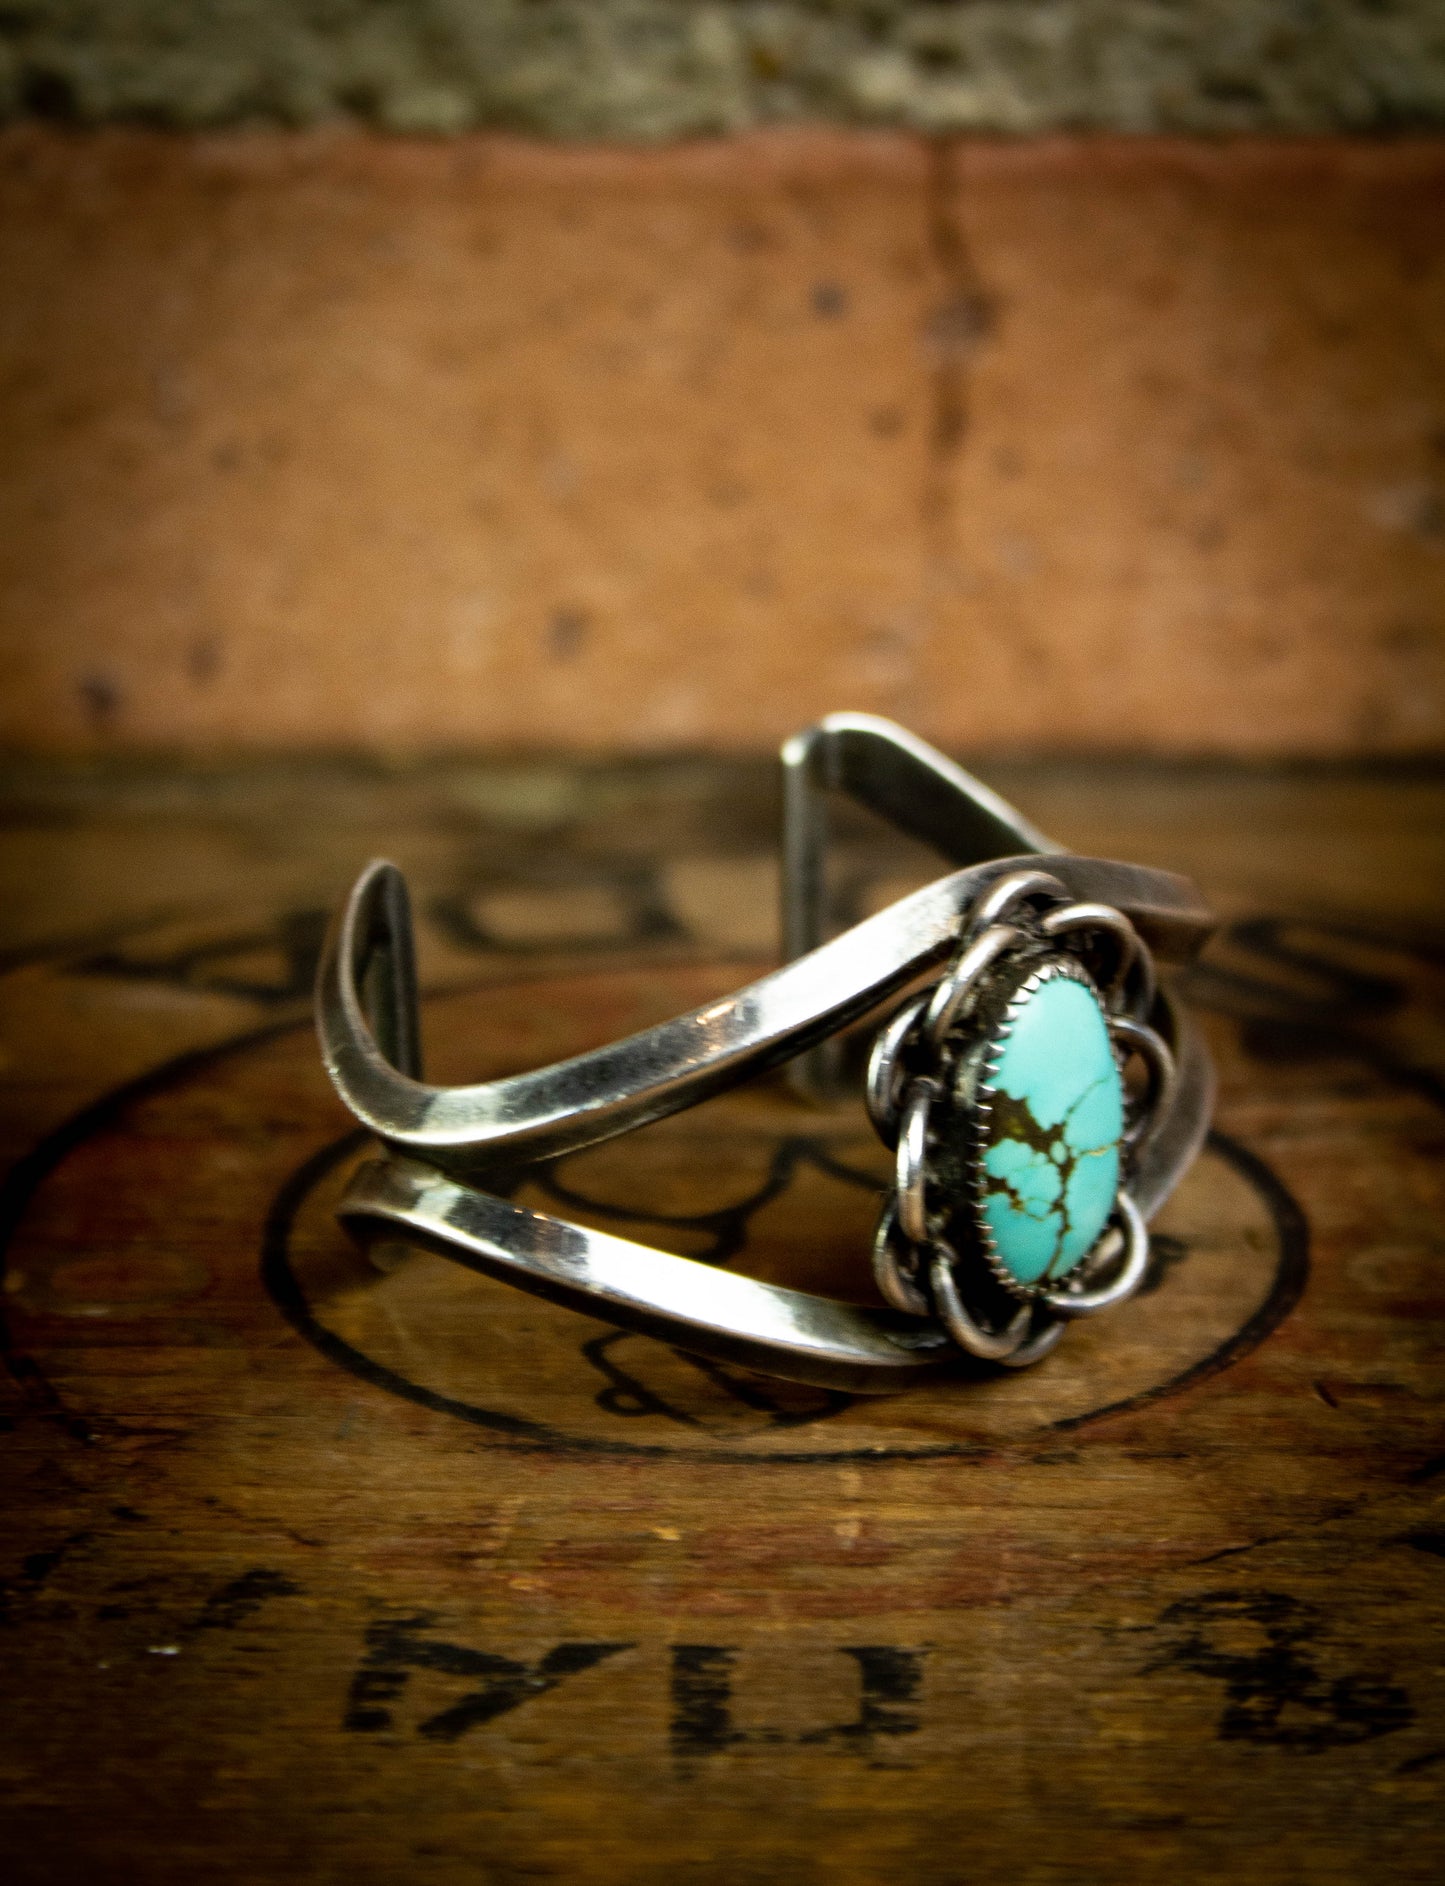 Vintage Silver and Turquoise Cuff Bracelet